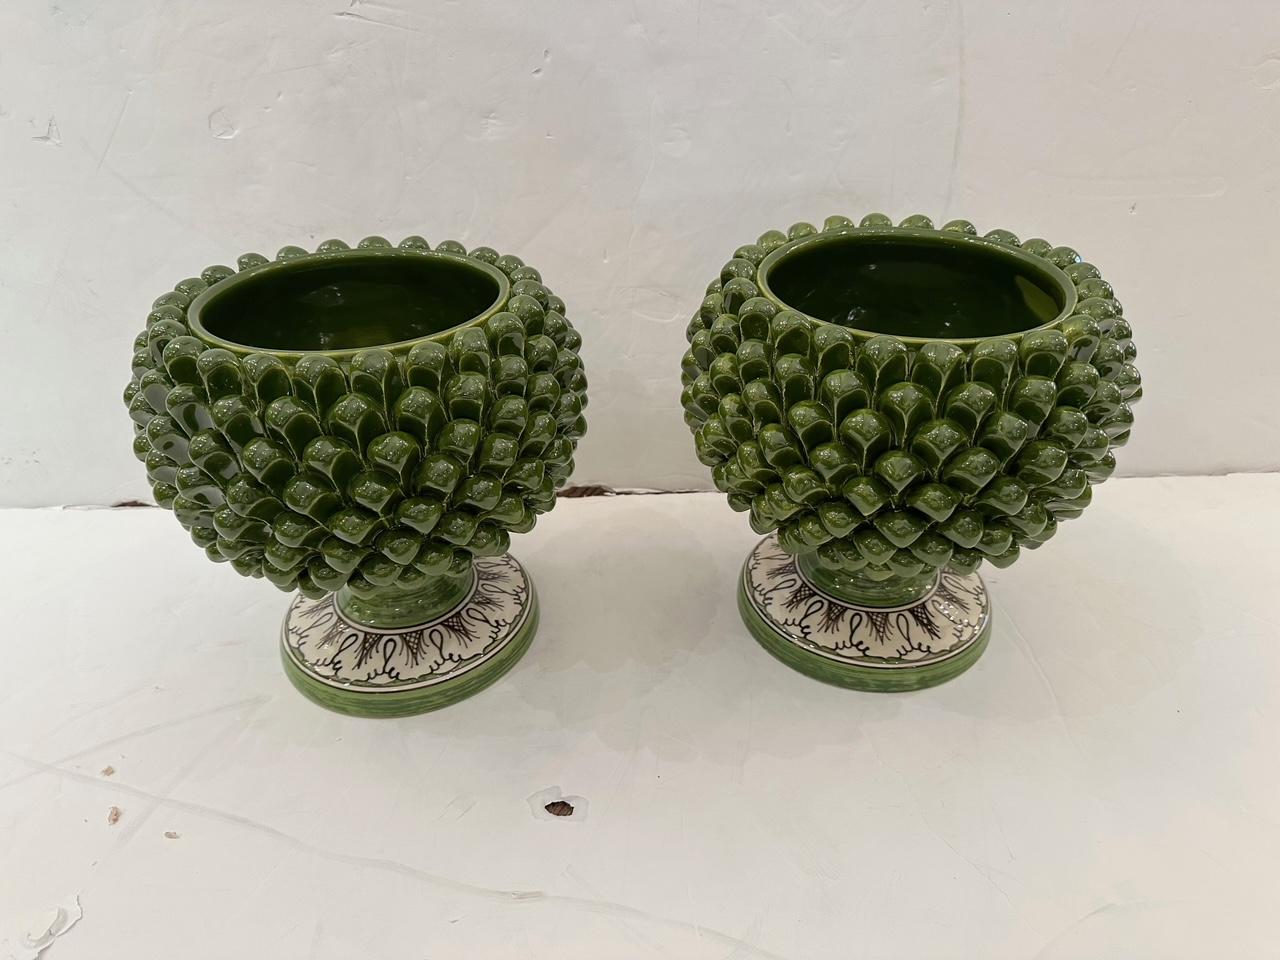 Pair of Italian-made traditional vases inspired by pinecone pattern by Abhika 

Opening 6.25 diameter
